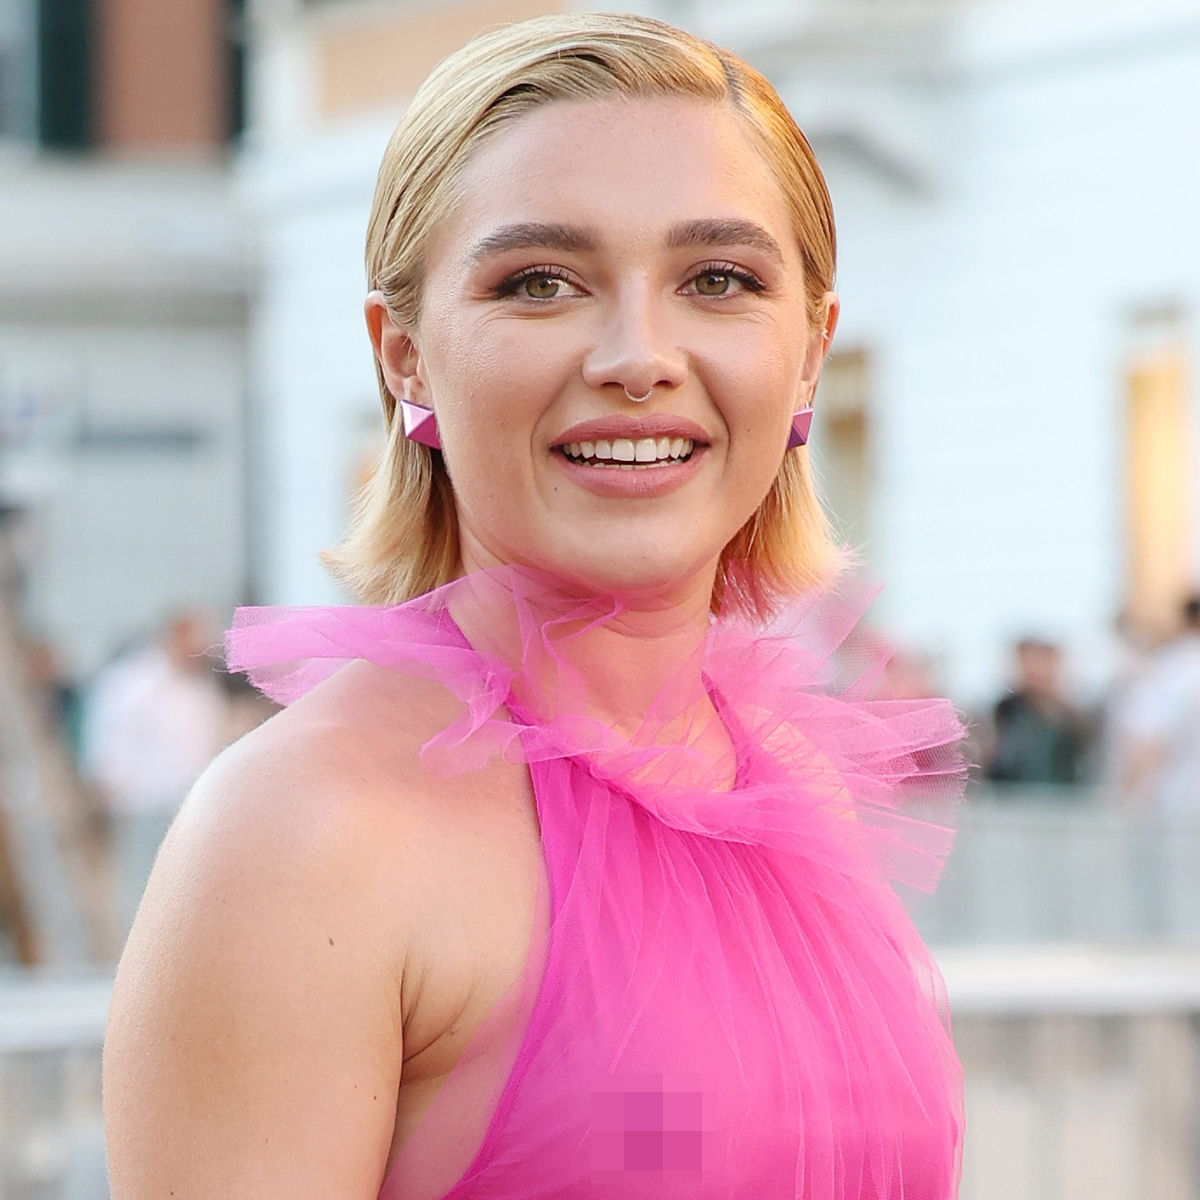 Why Florence Pugh Says Her Free the Nipple Moment “Scared” Her Haters